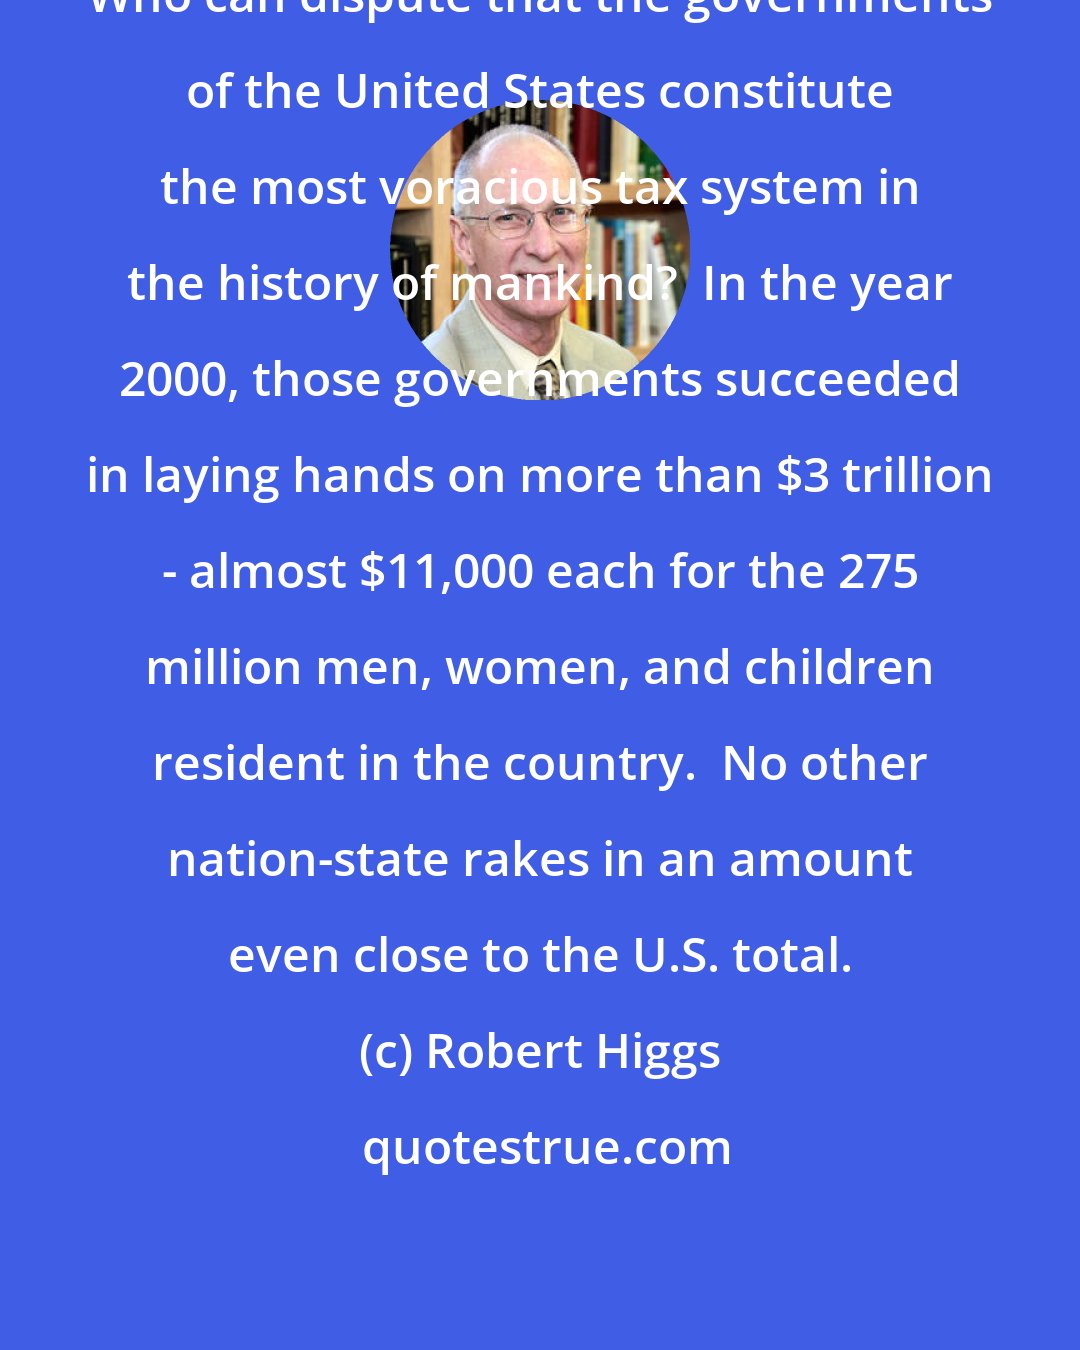 Robert Higgs: Who can dispute that the governments of the United States constitute the most voracious tax system in the history of mankind?  In the year 2000, those governments succeeded in laying hands on more than $3 trillion - almost $11,000 each for the 275 million men, women, and children resident in the country.  No other nation-state rakes in an amount even close to the U.S. total.